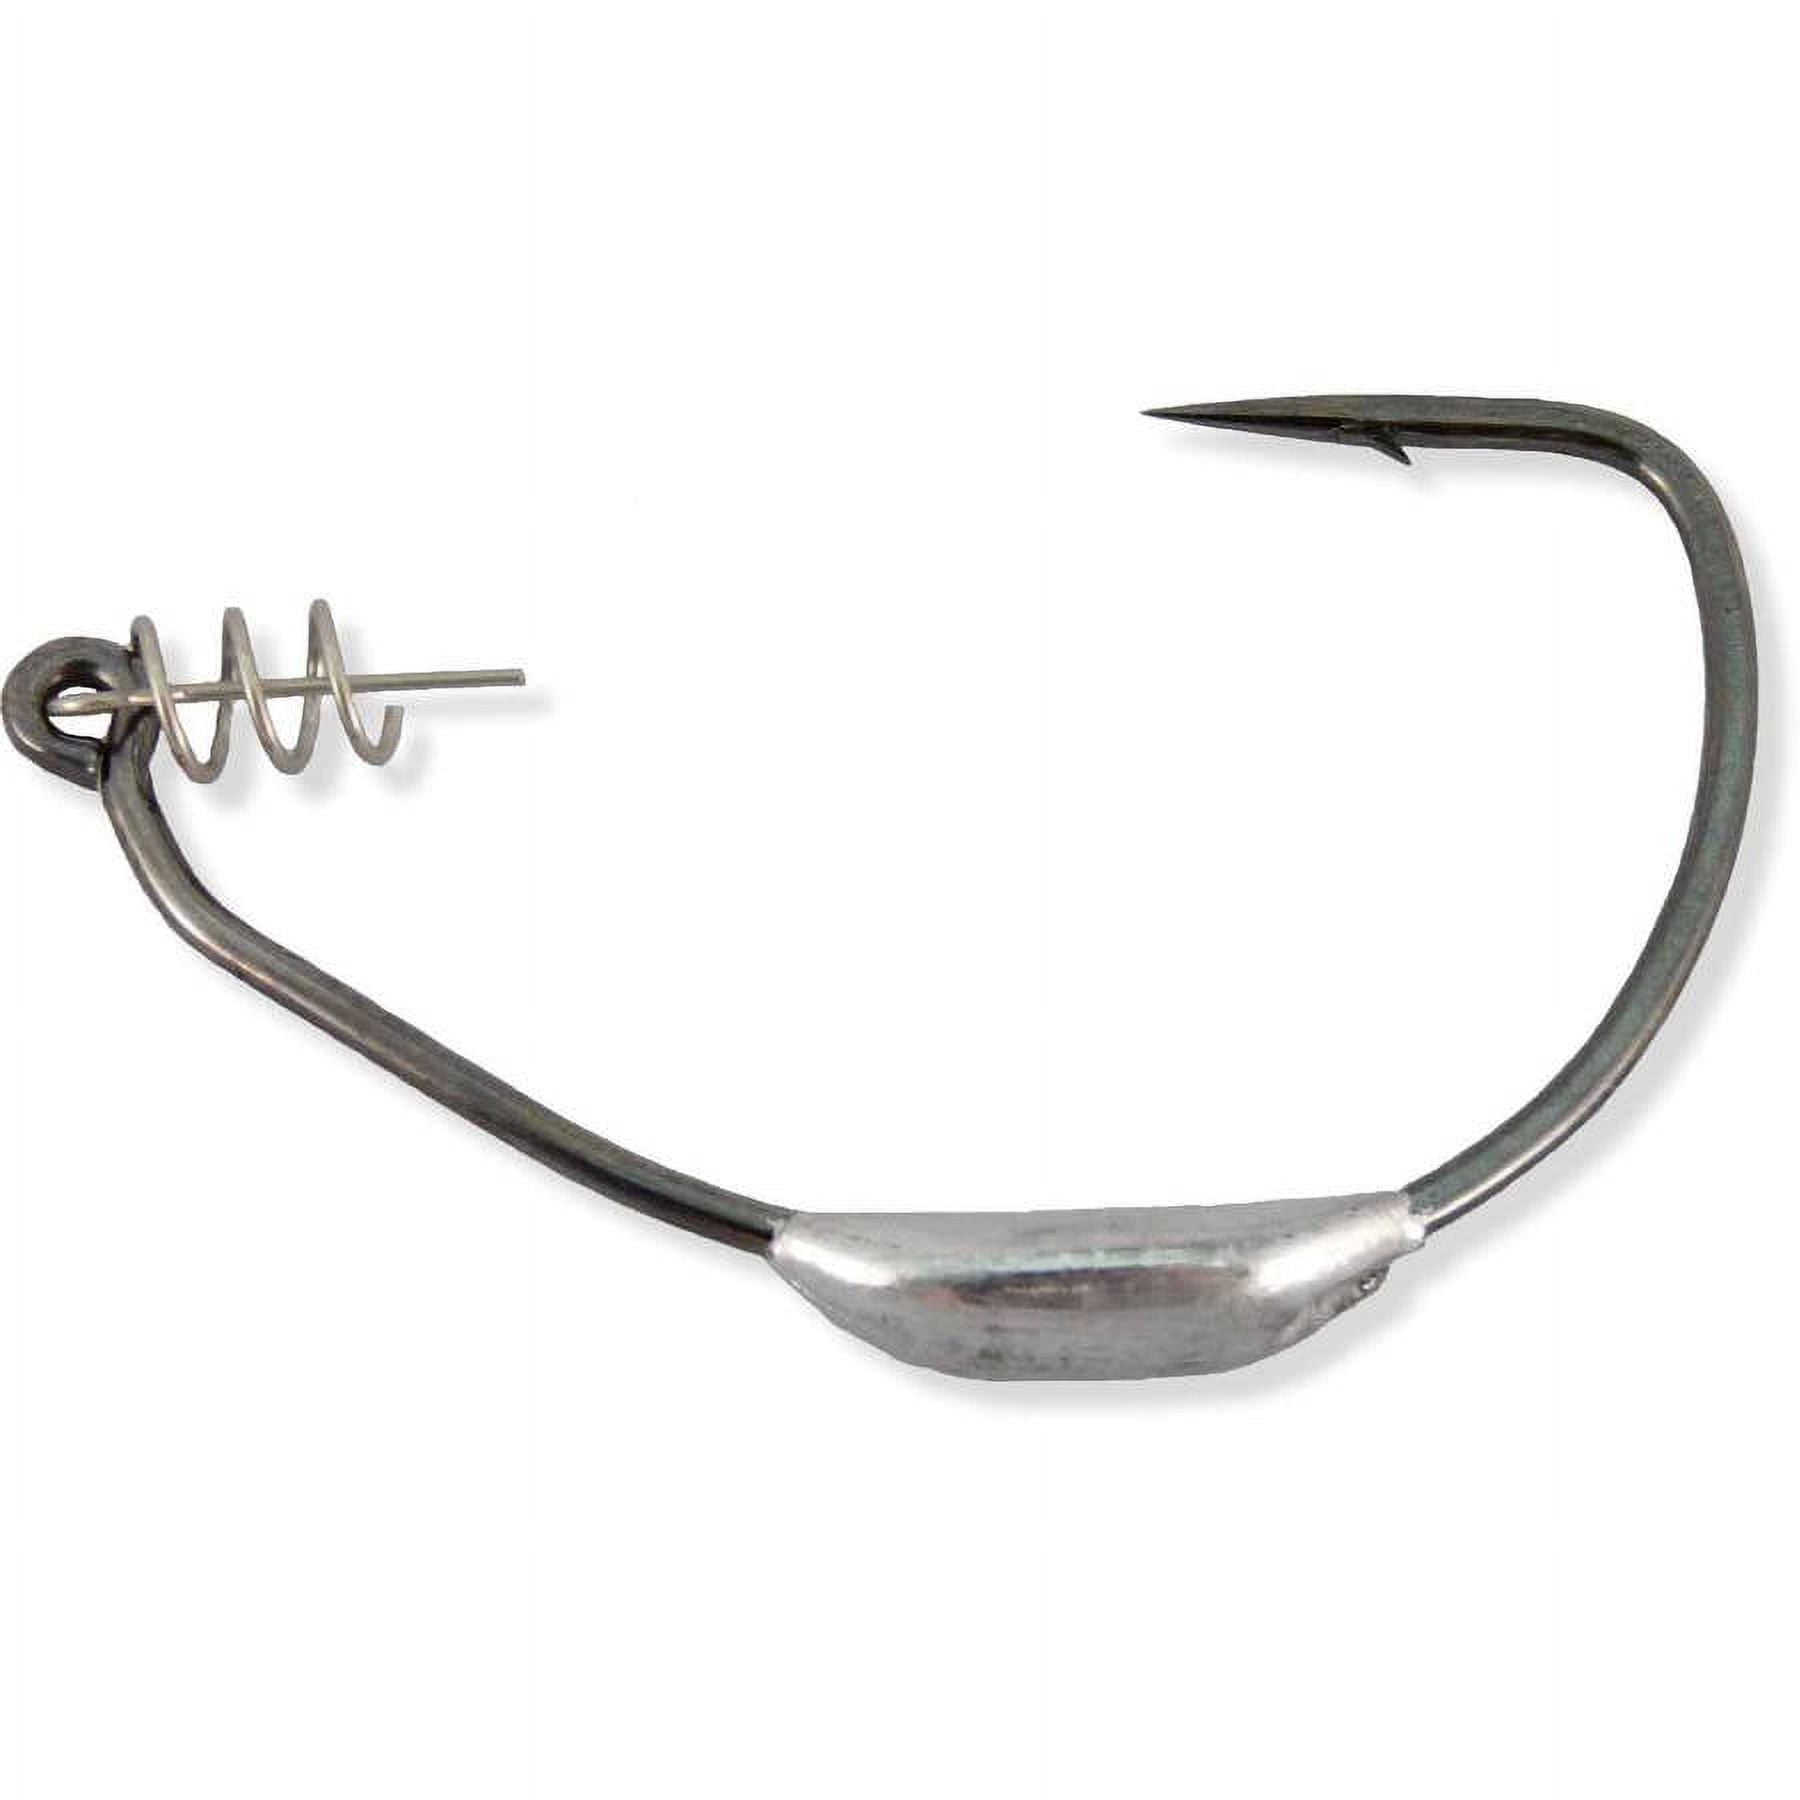 Owner Weighted Beast Soft Bait Hook (Size 6/0) 5130W-046, Hooks -   Canada